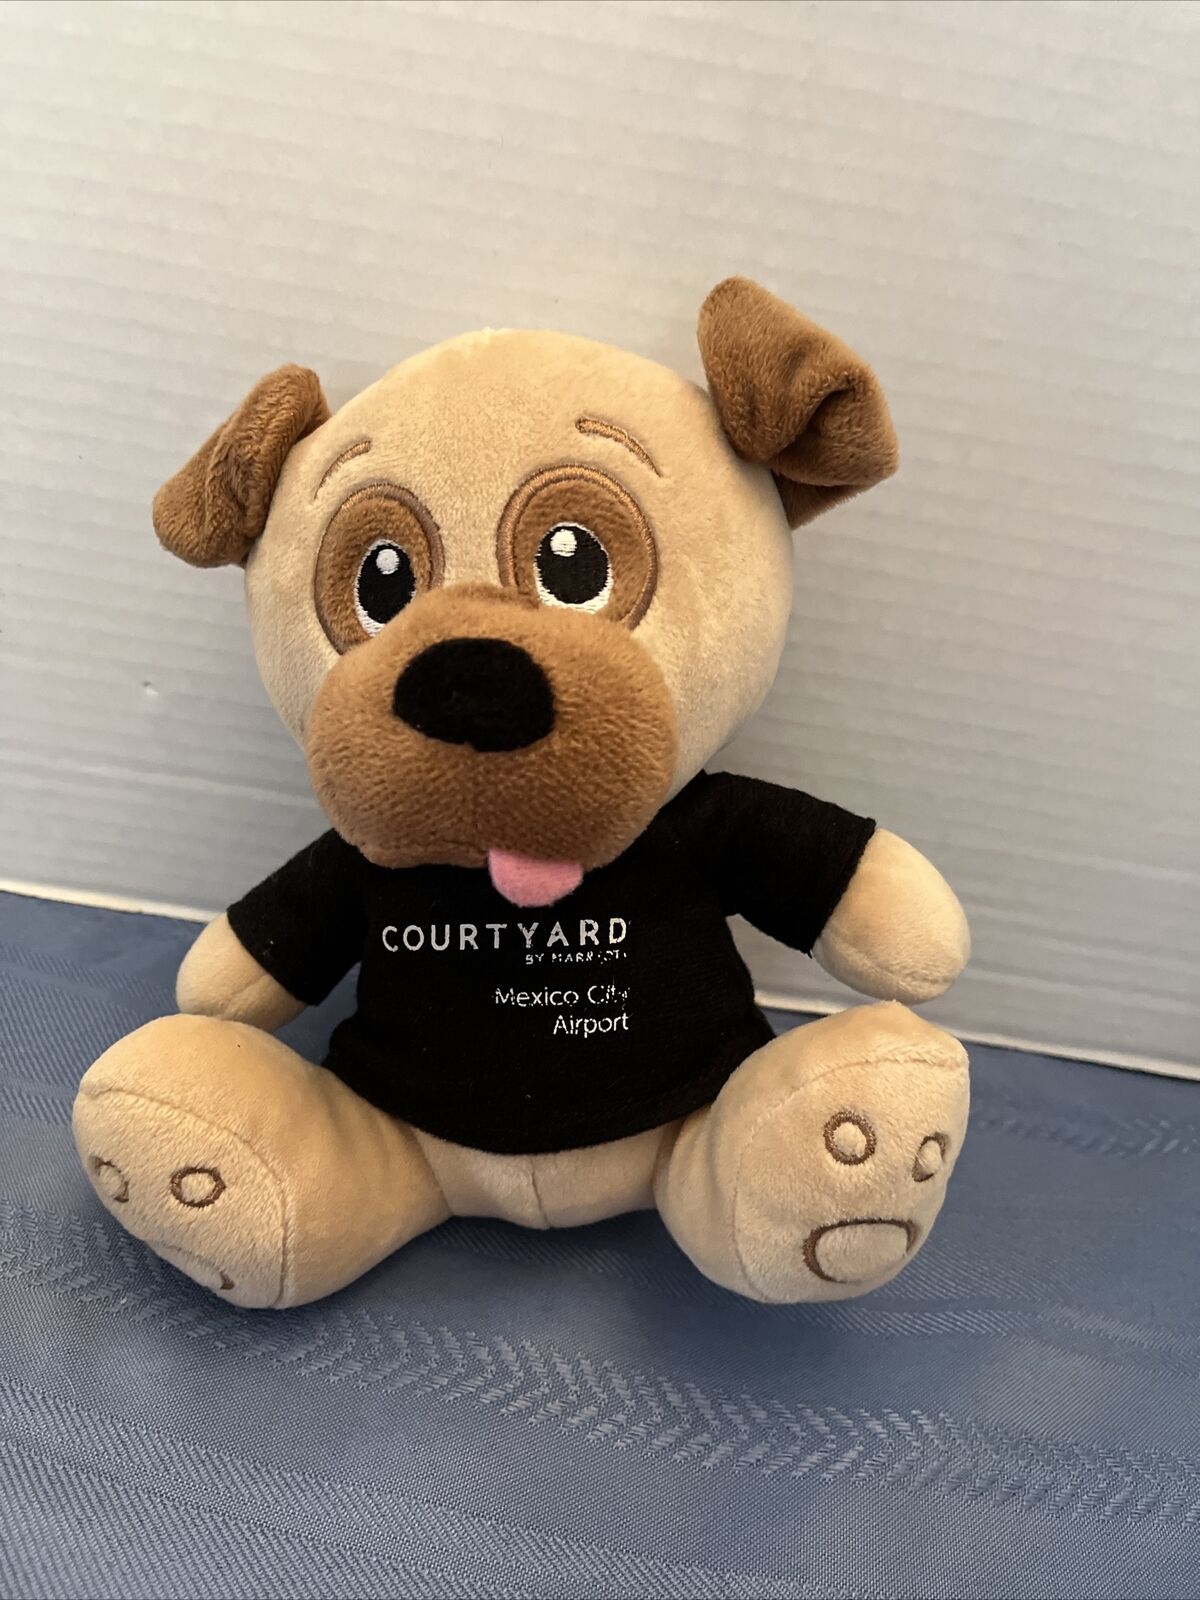 Courtyard By Marriot Mexico City Airport Advertisement Plush Dog Mascot Toy